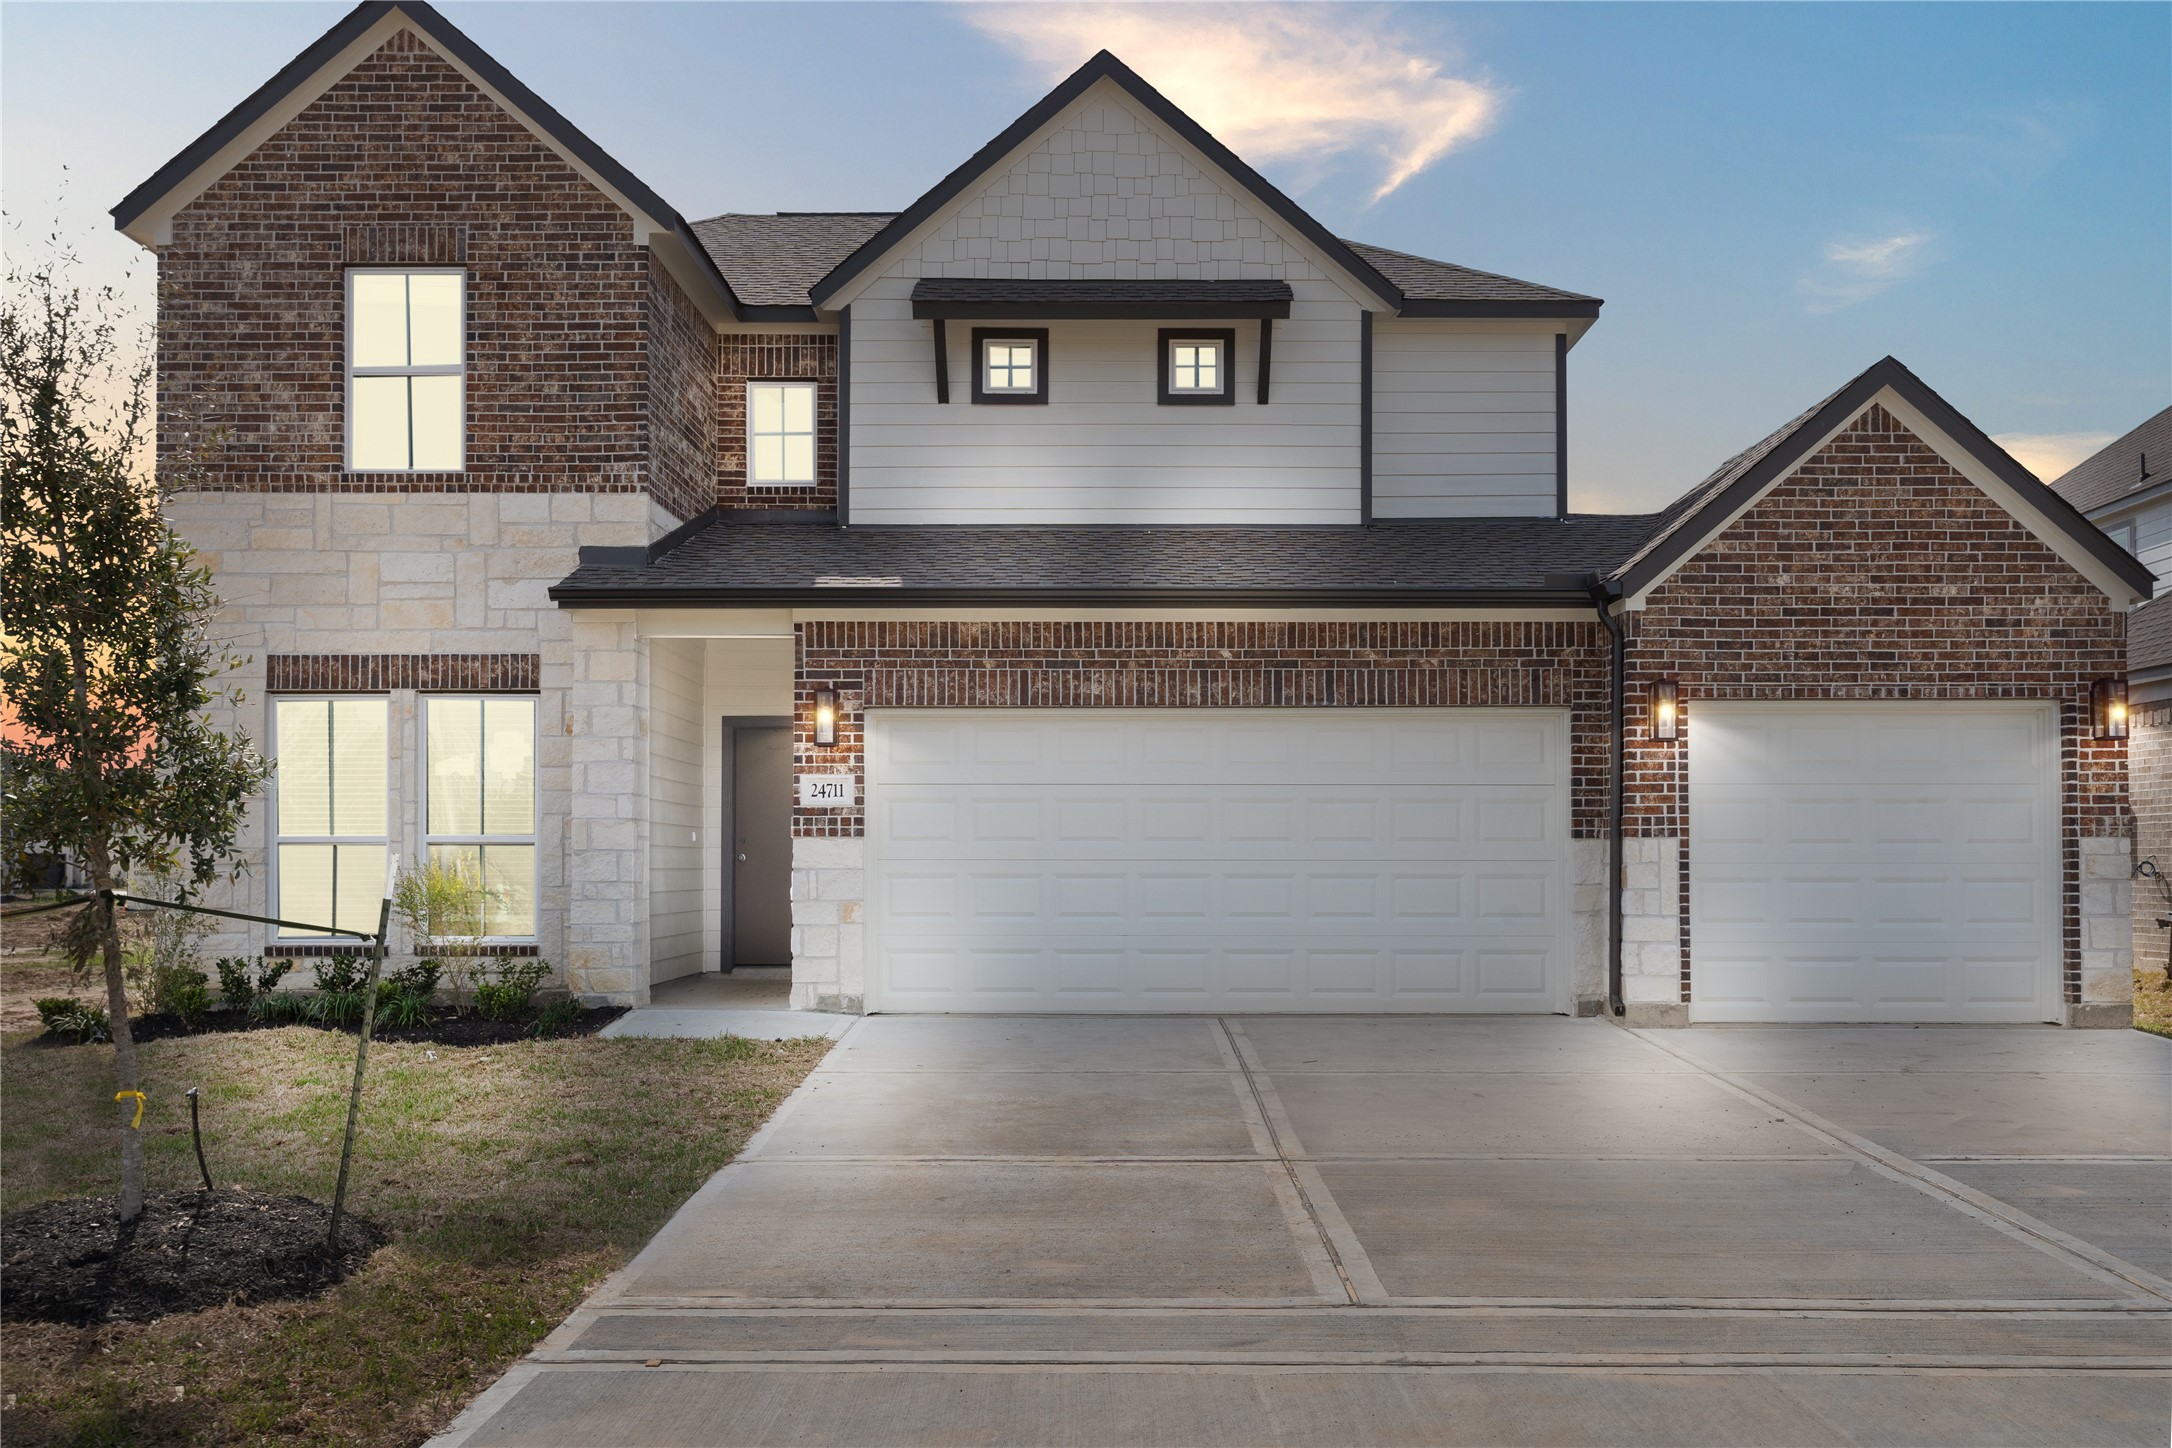 Welcome home to 2818 Skerne Forest Drive located in the community of Bradbury Forest and zoned to Spring ISD.